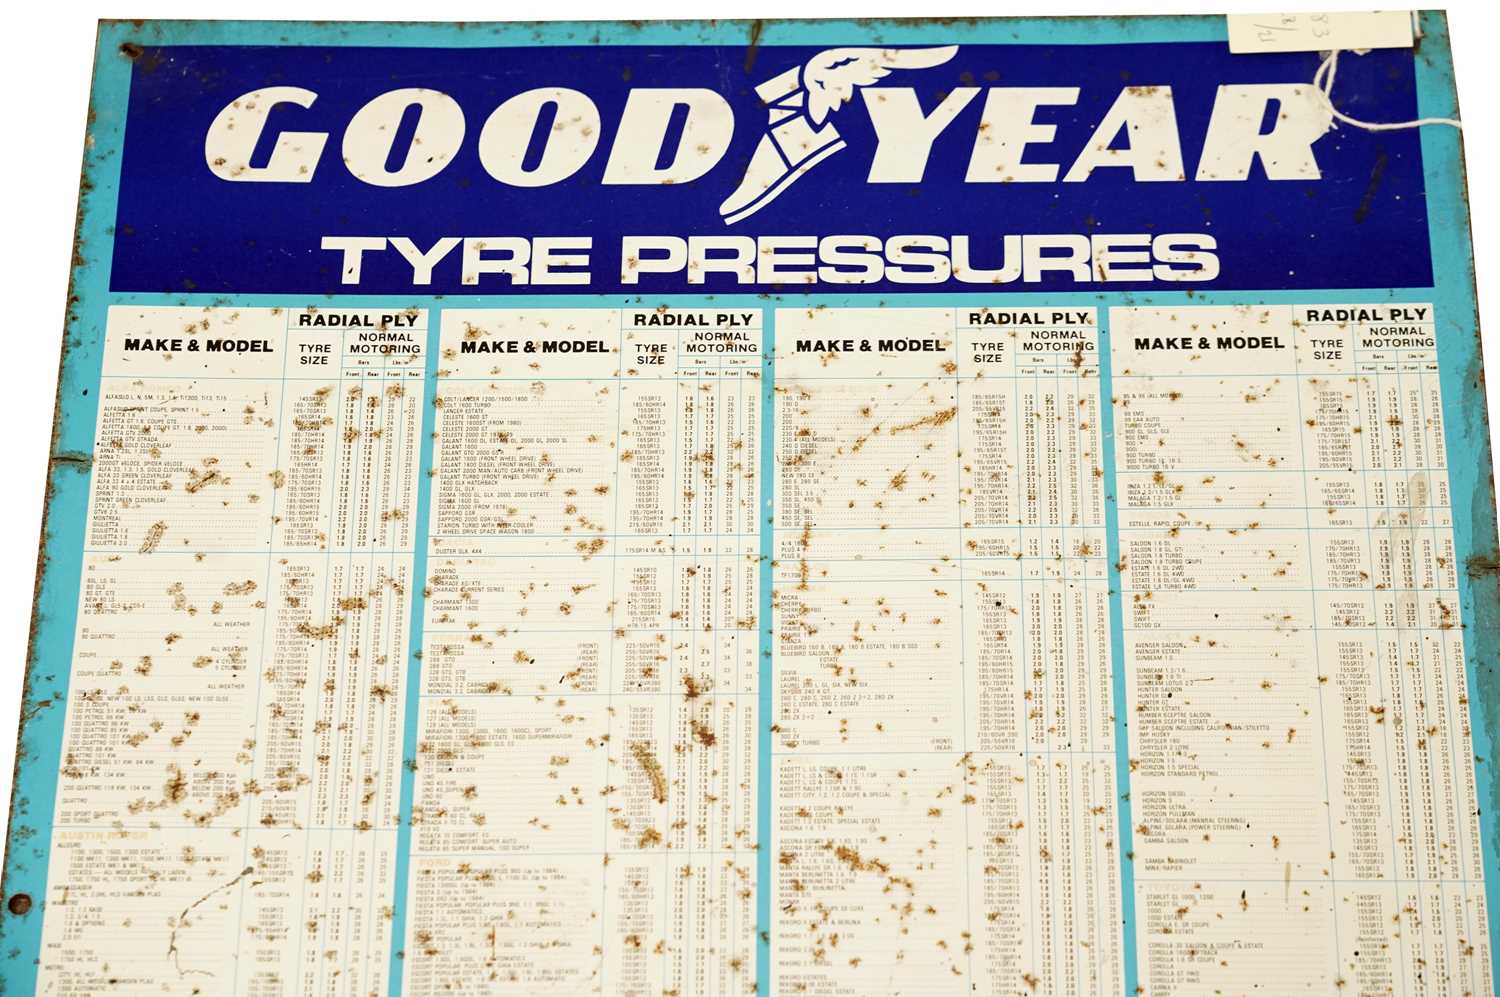 A Good Year tyre pressure chart enamel sign - Image 2 of 3